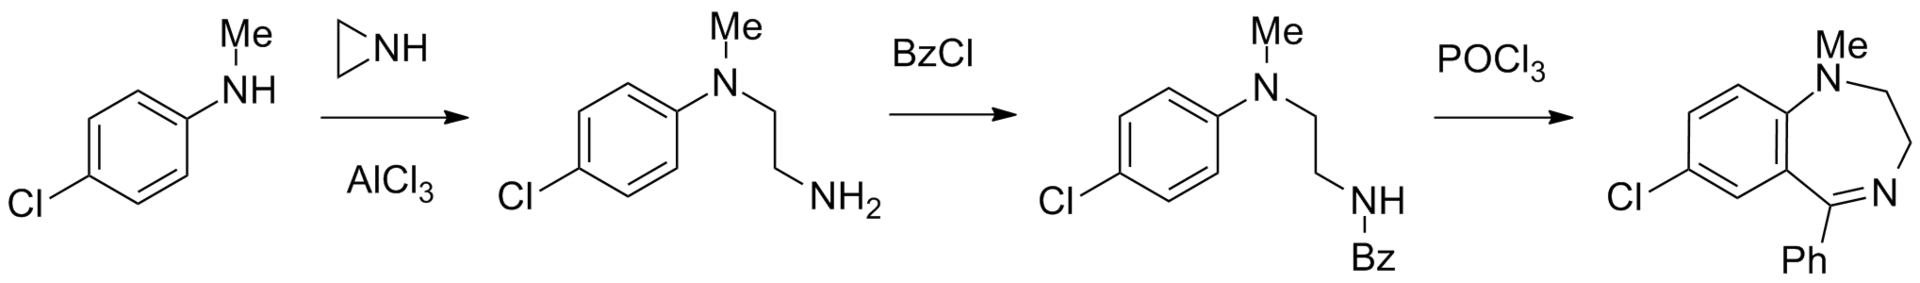 File:Medazepam synthesis 4.png